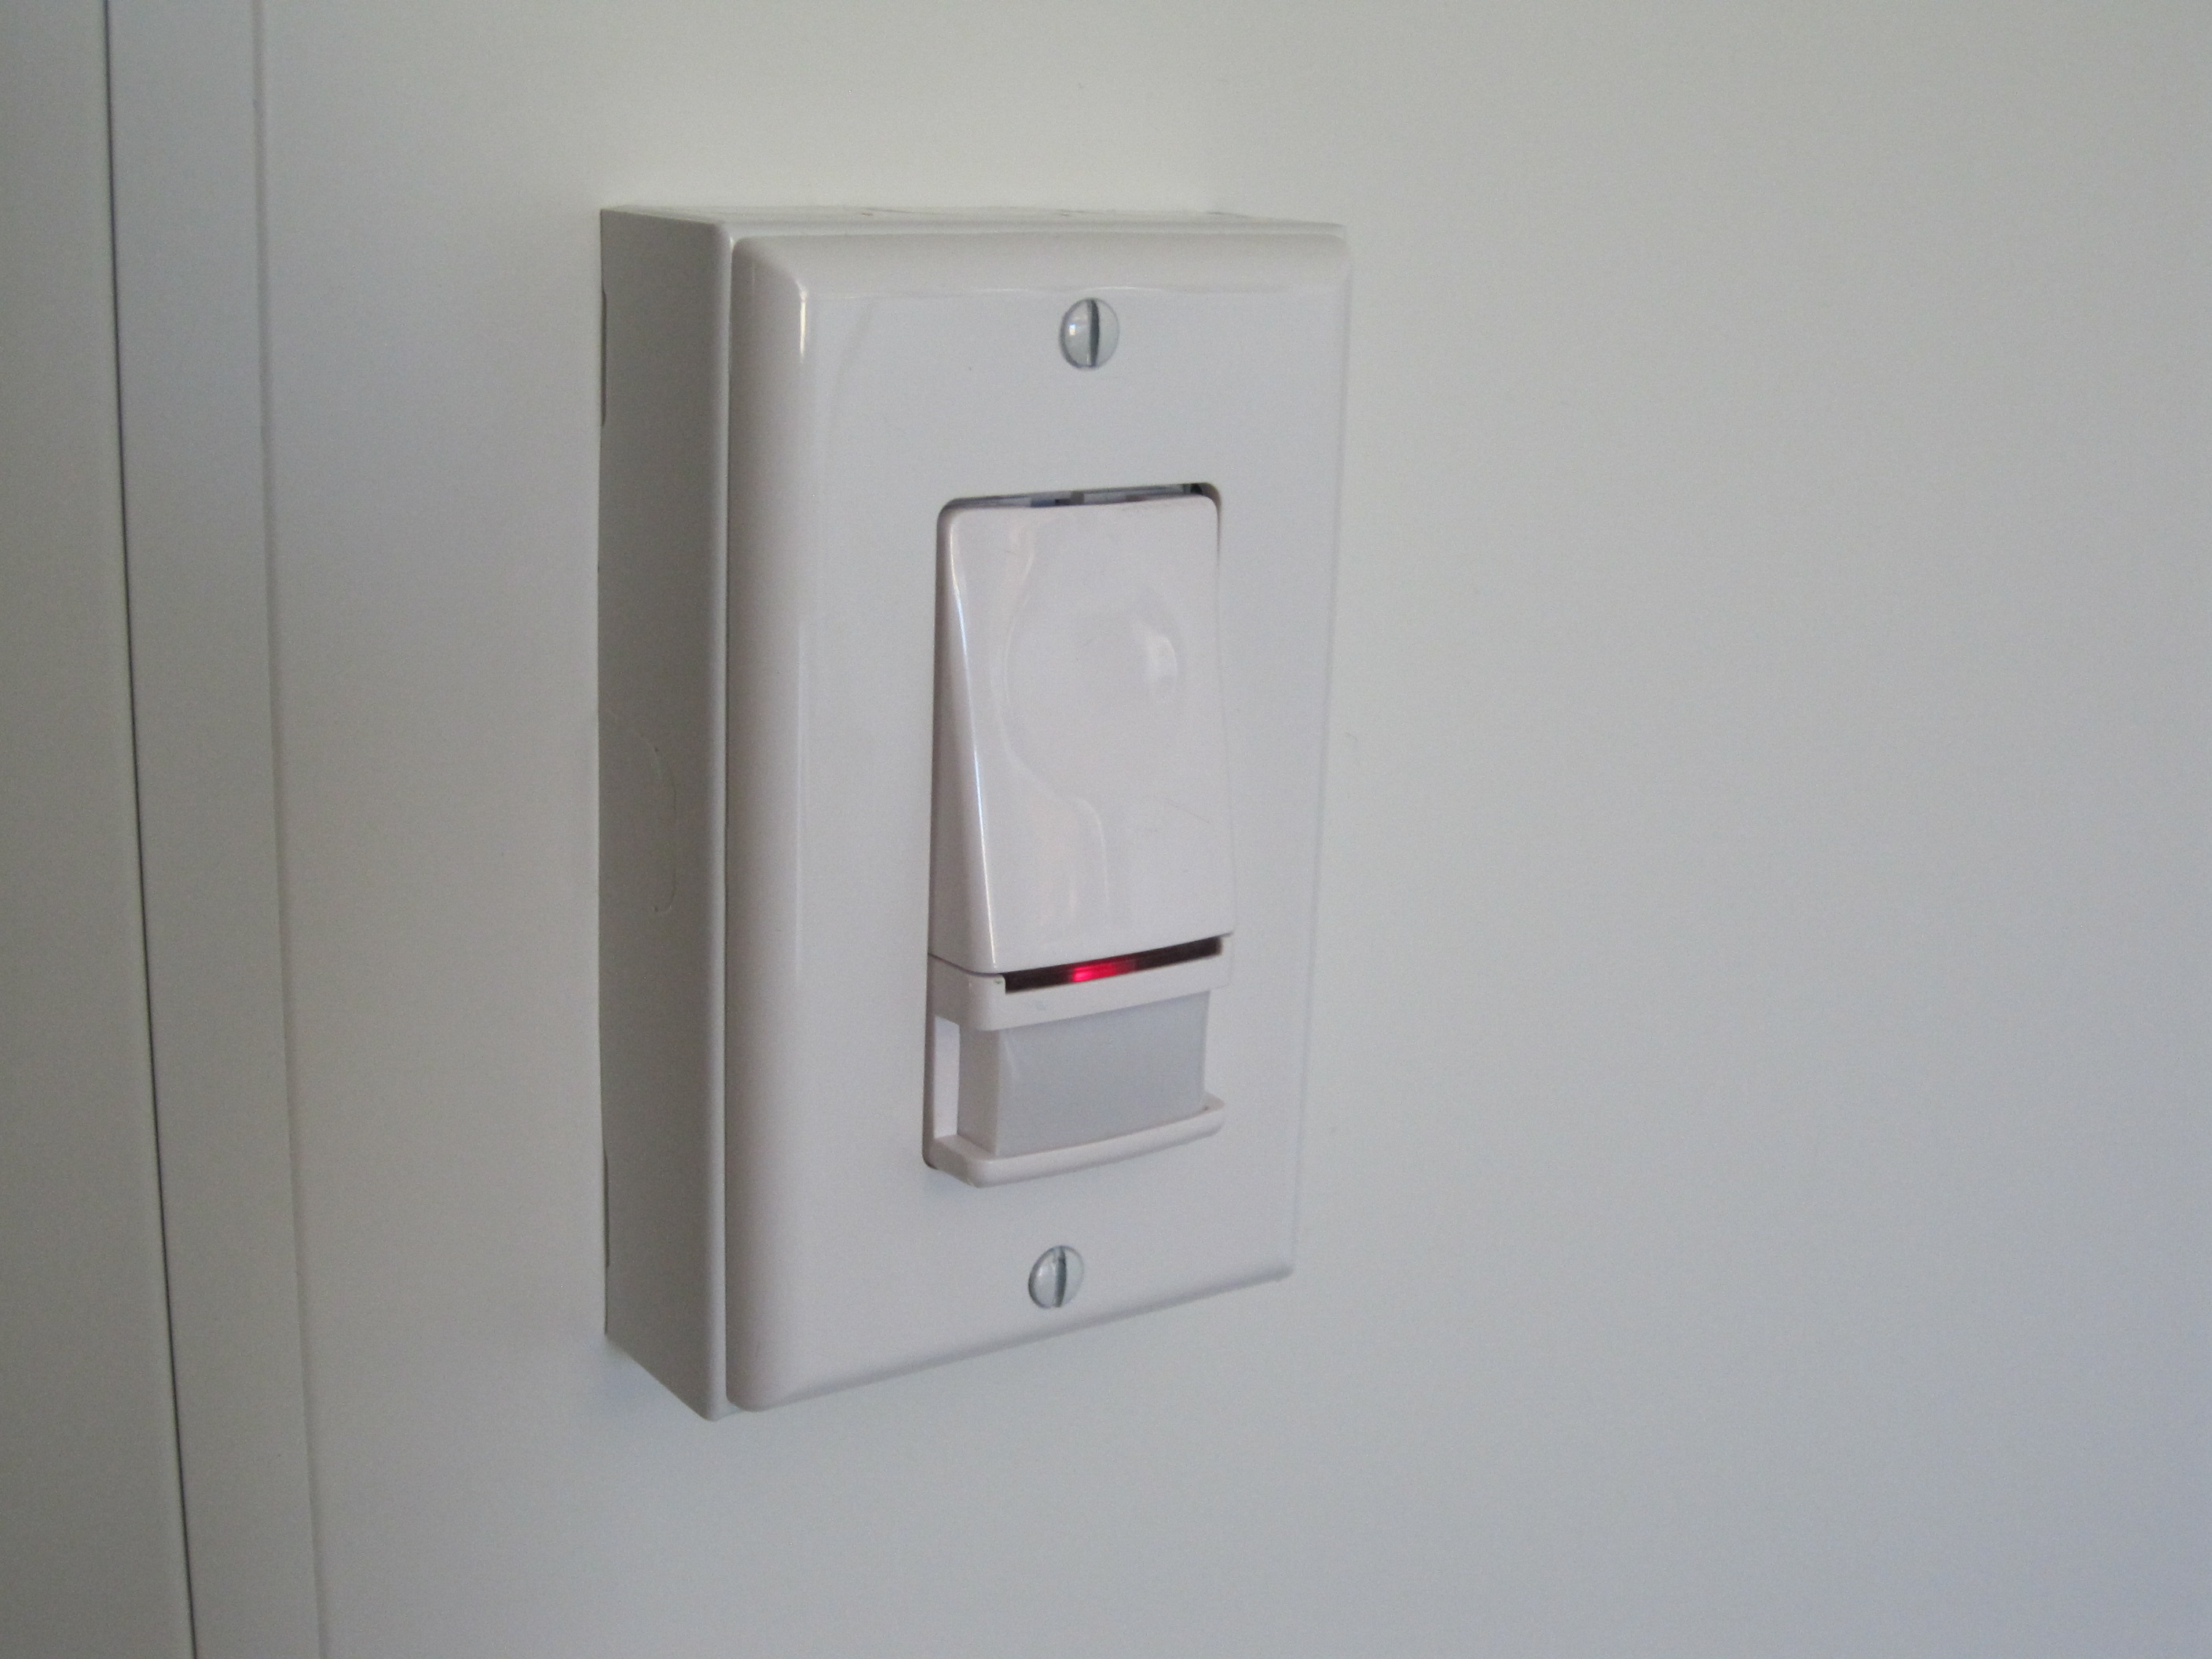 Photo of a vacancy sensor light switch on the wall.